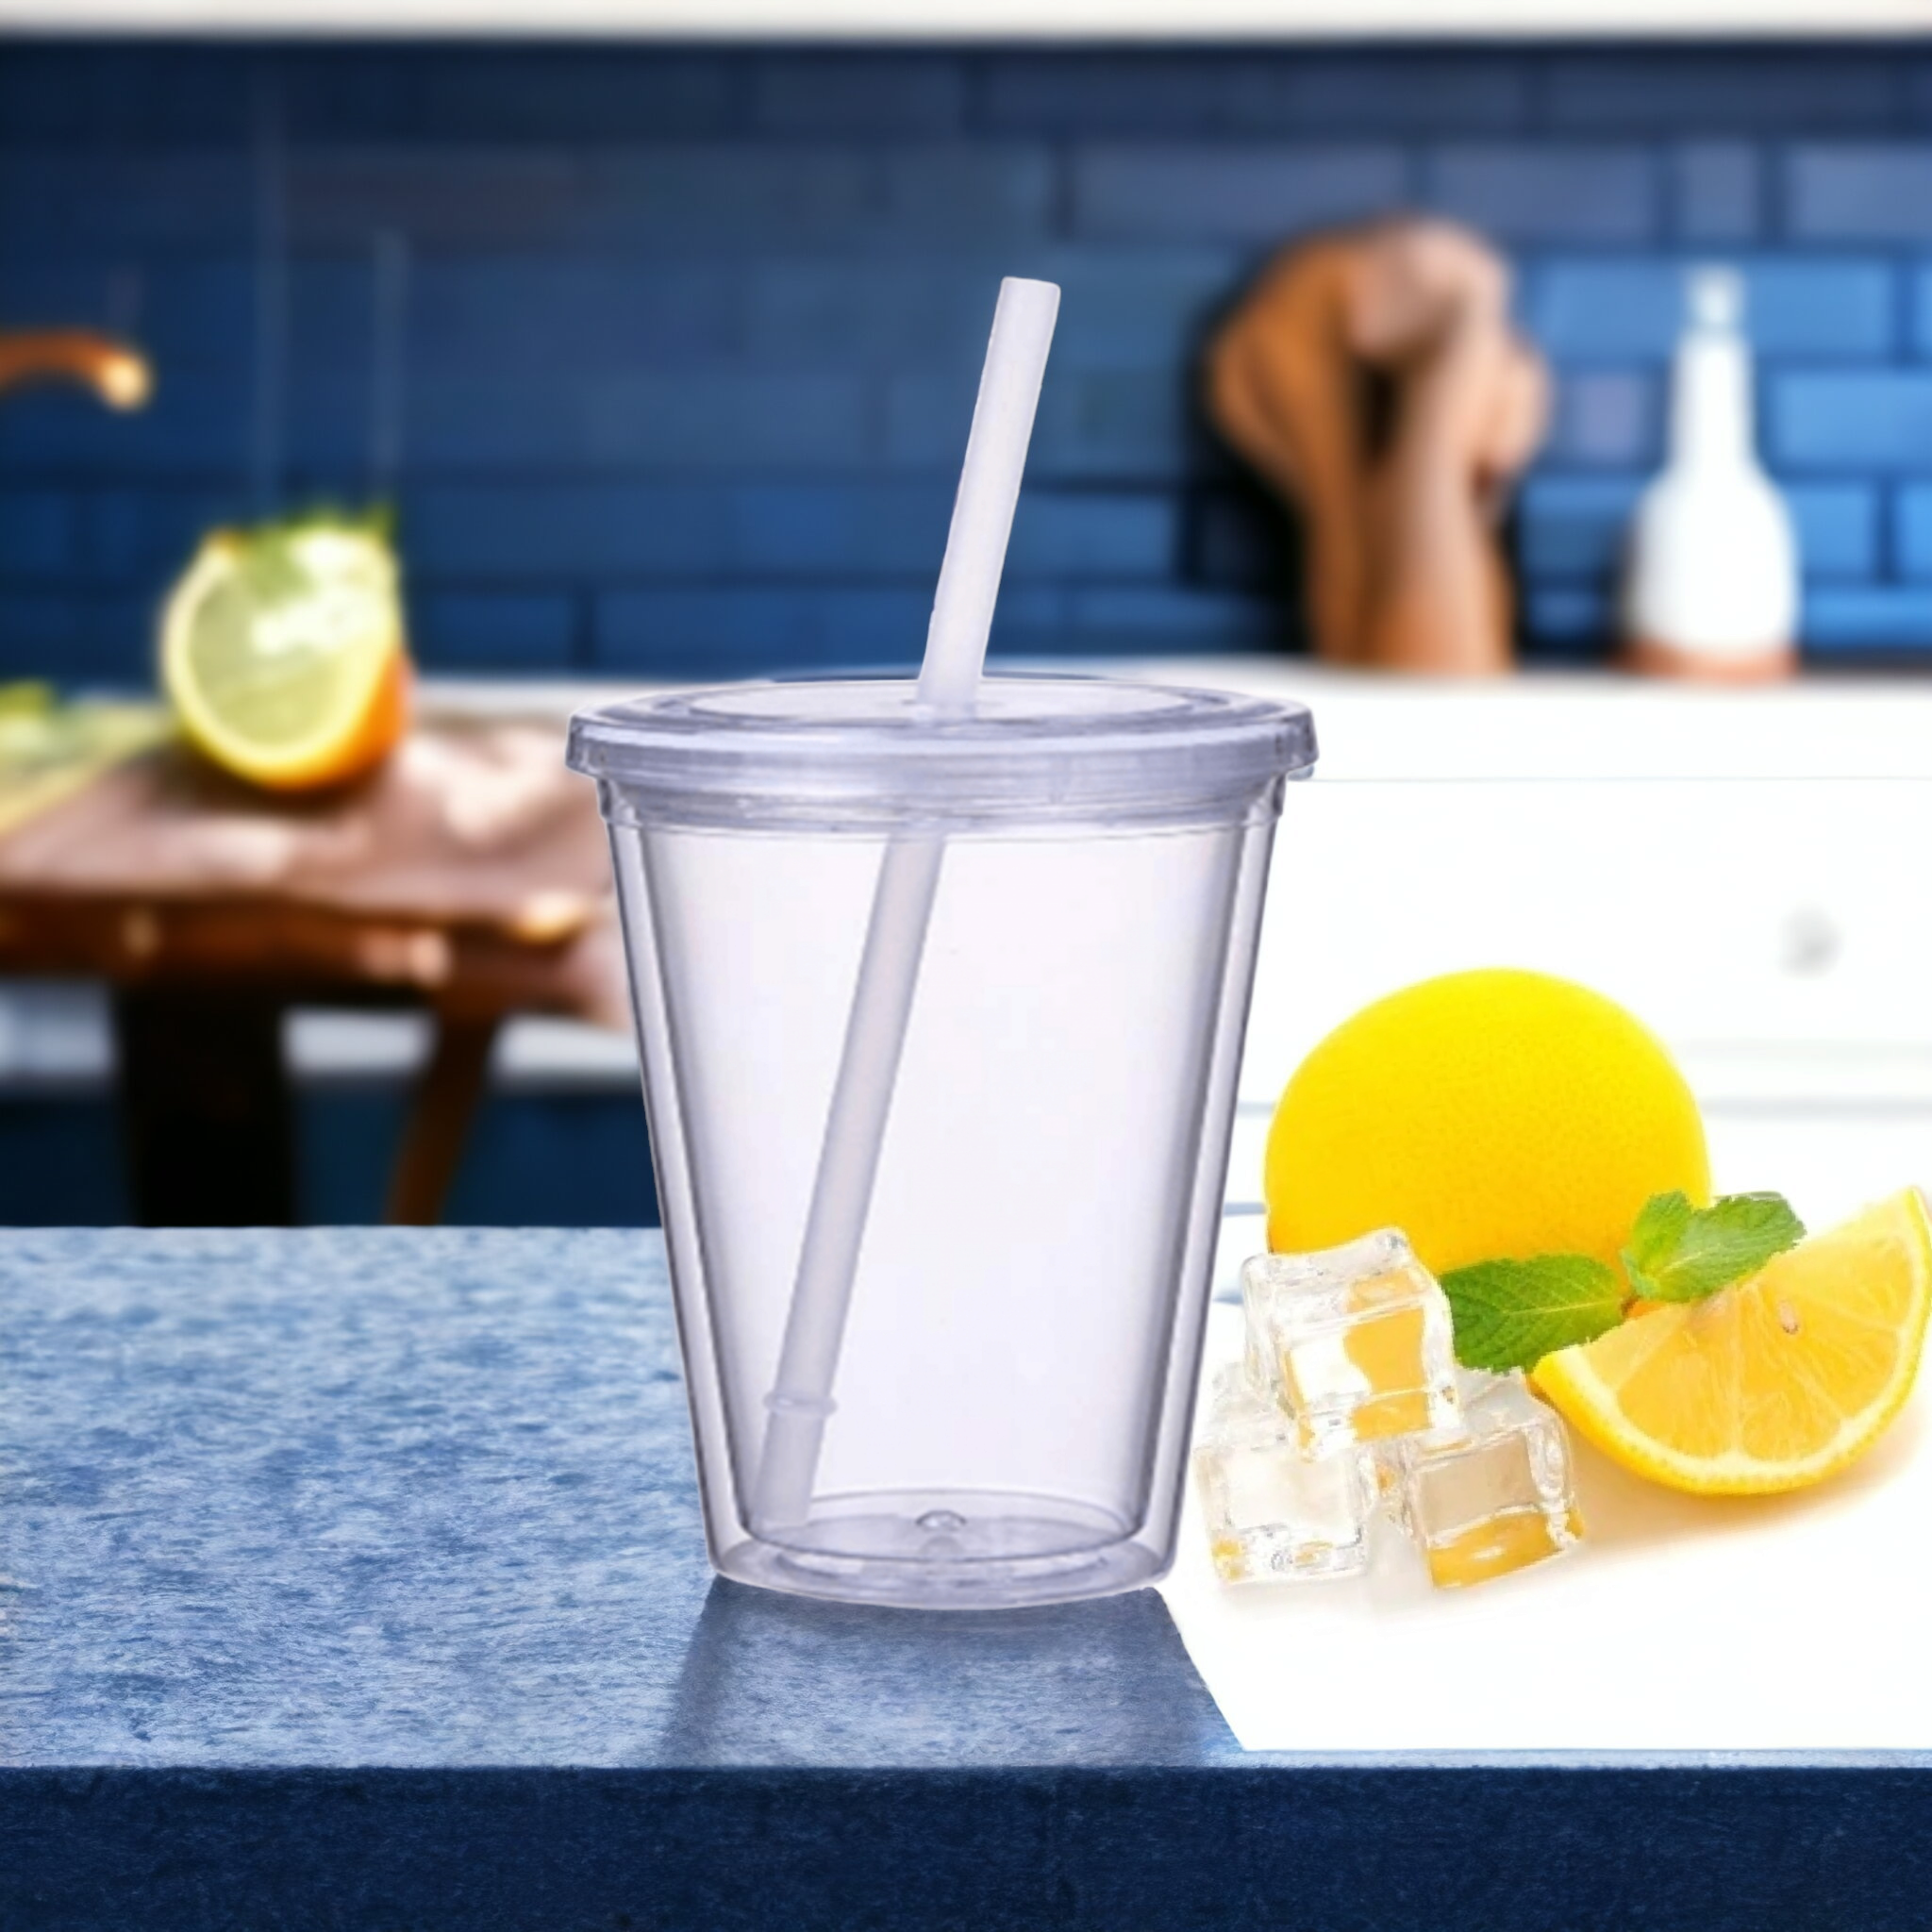 350ml Acrylic Double Wall Insulated Cup with Straw